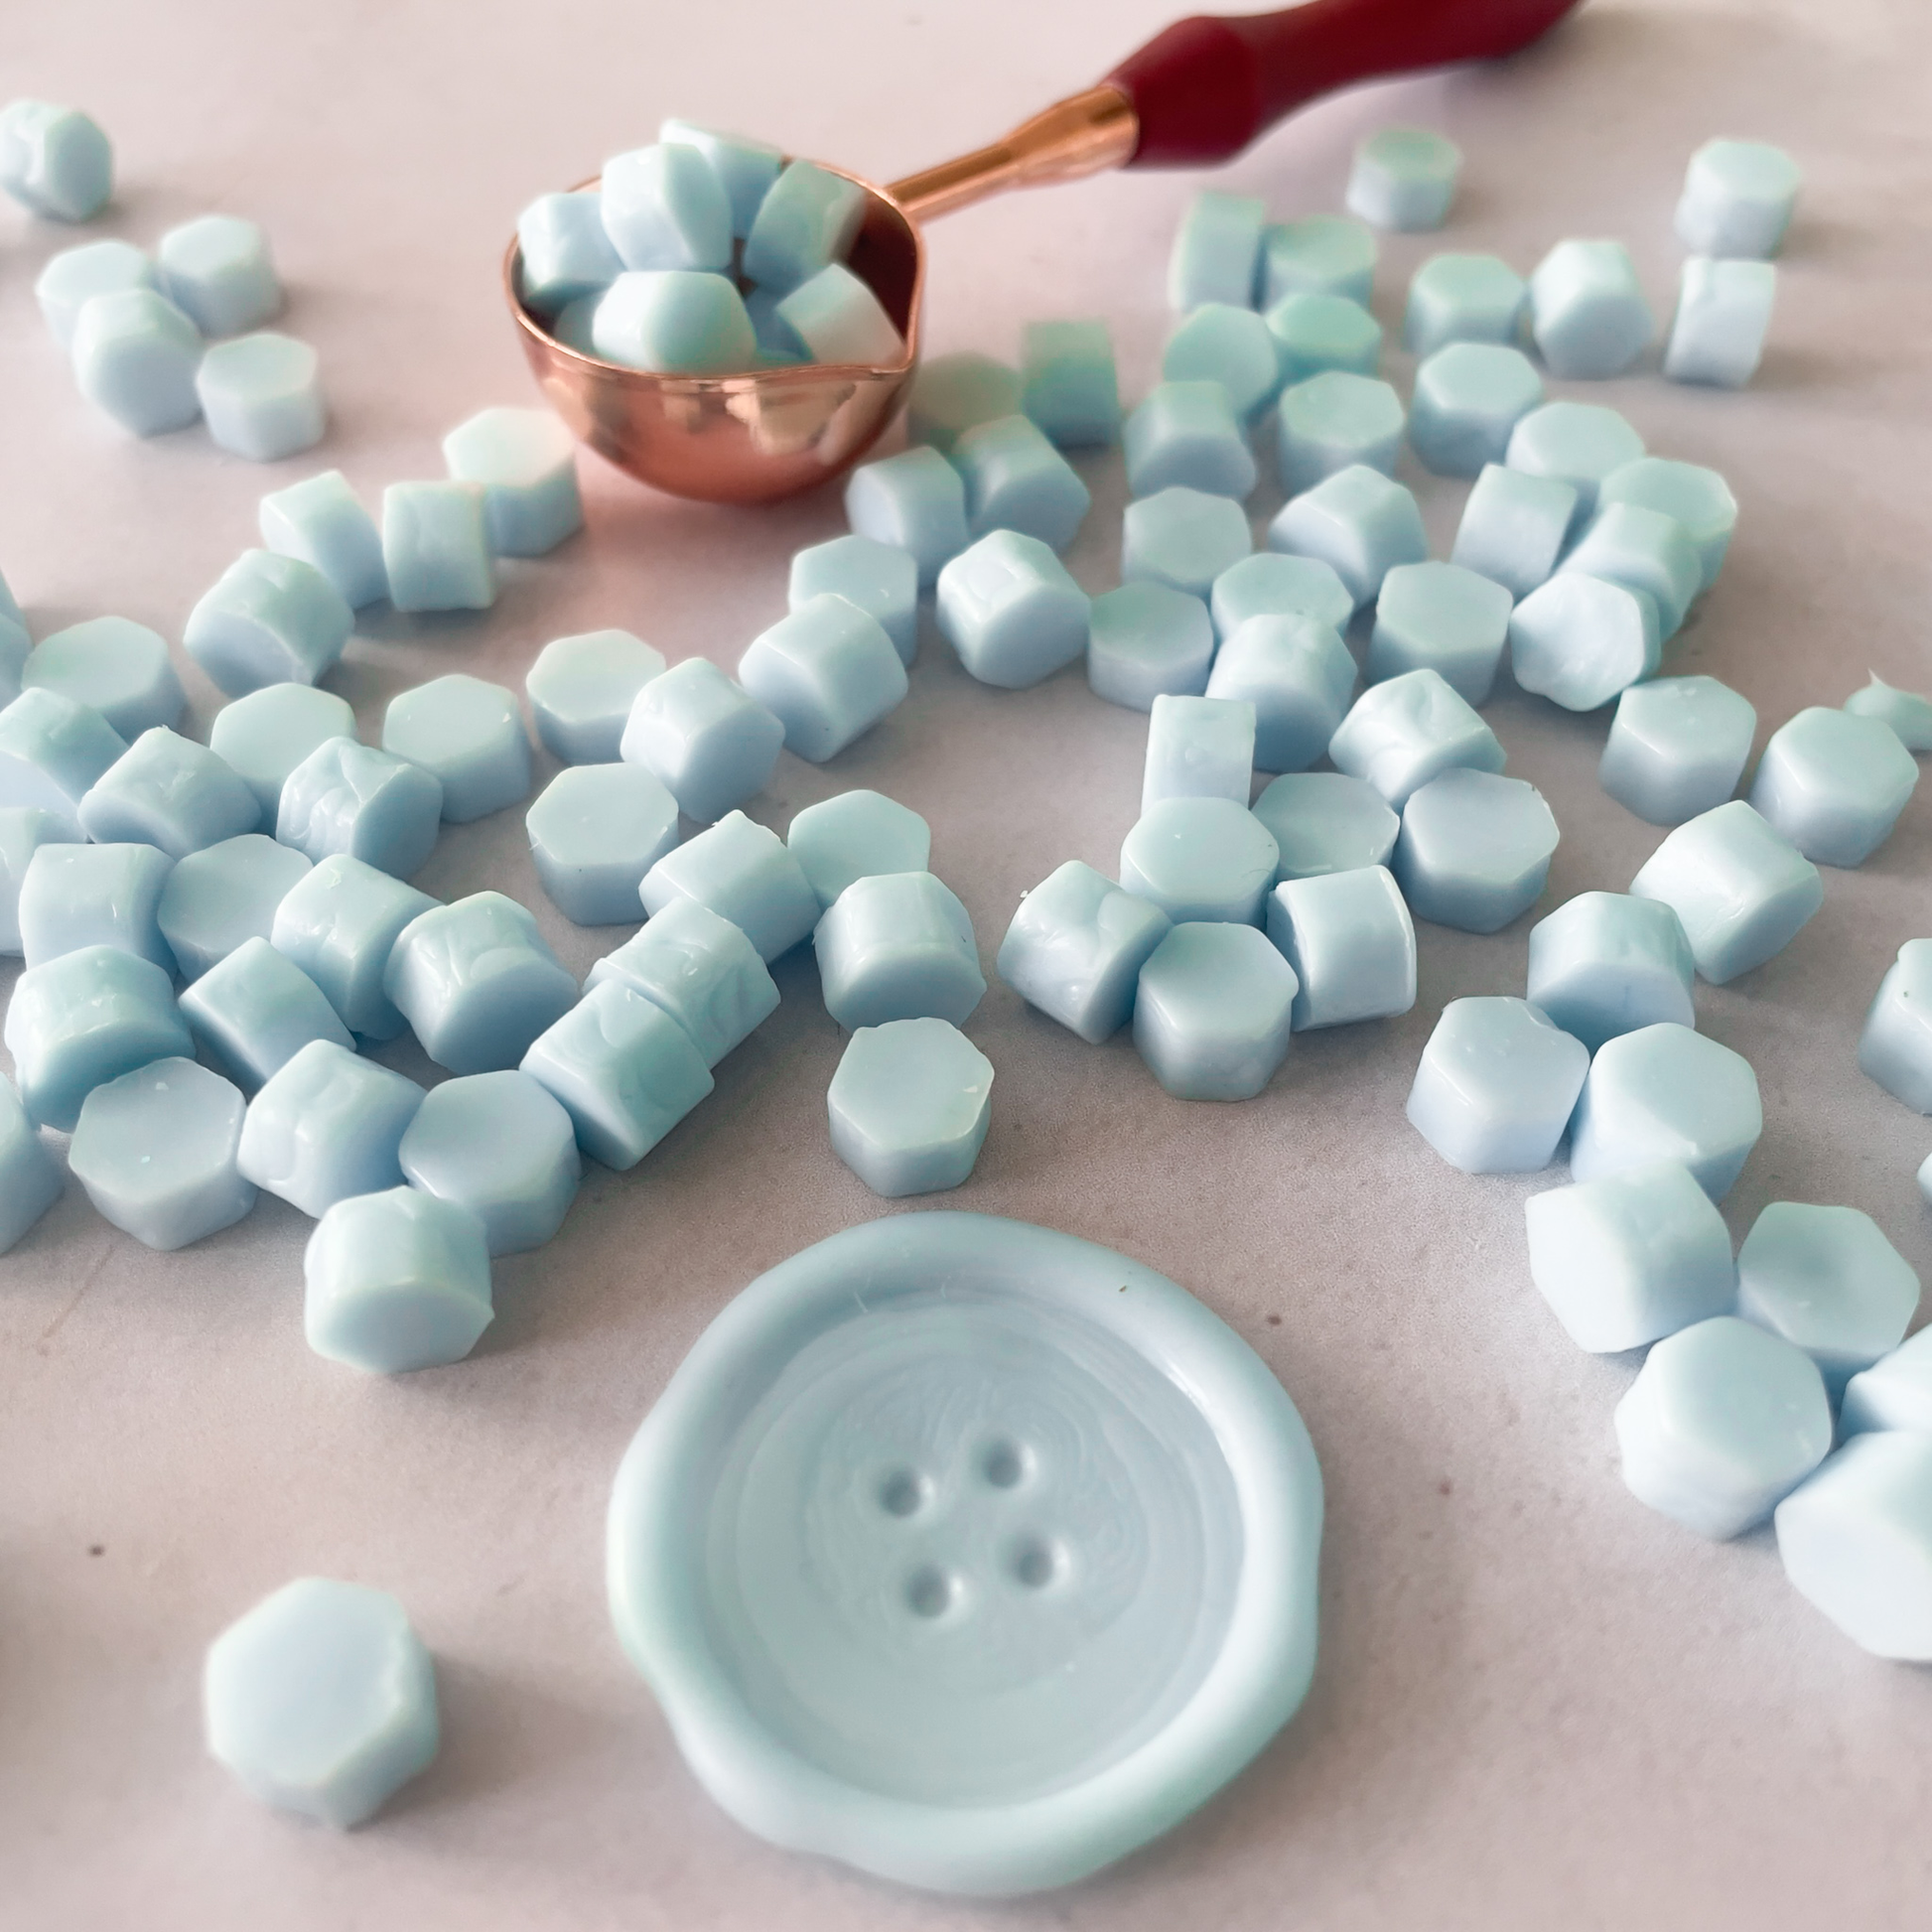 aqua blue sealing wax beads to use with a melting spoon.  Sealing wax supplies